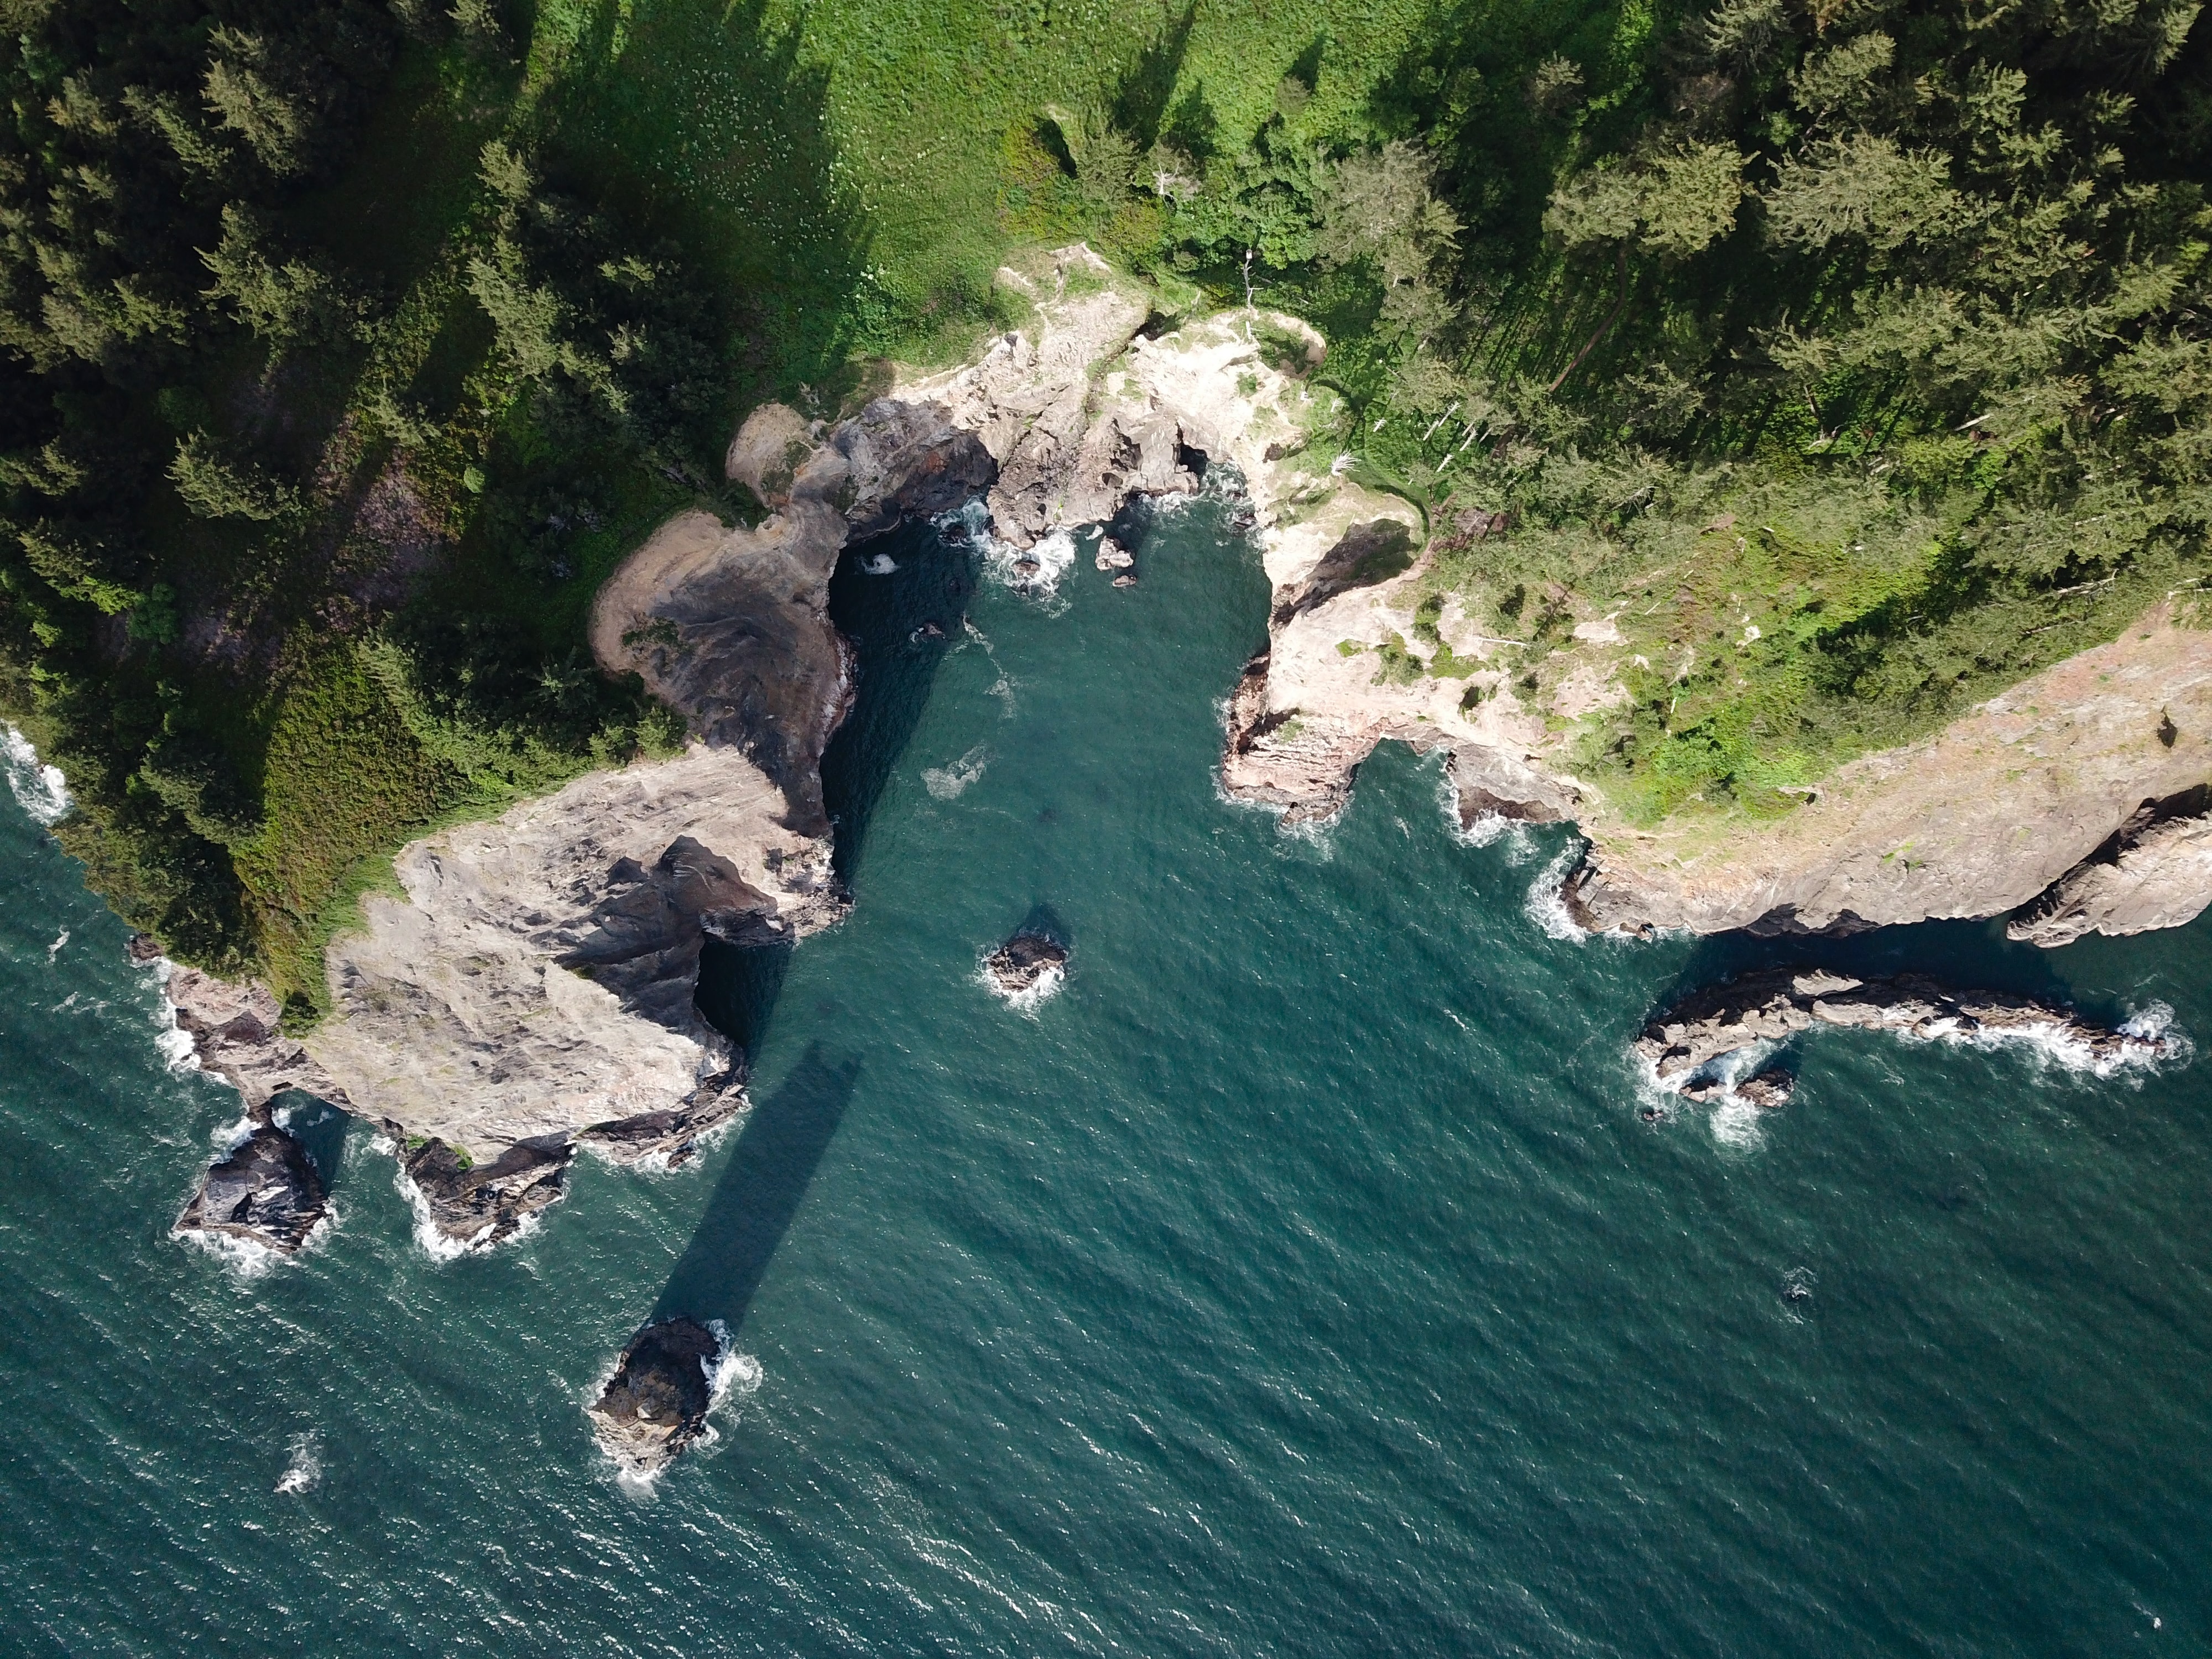 Aerial view of rocky cliffs on the water. Grass and trees are on the top of the cliffs.